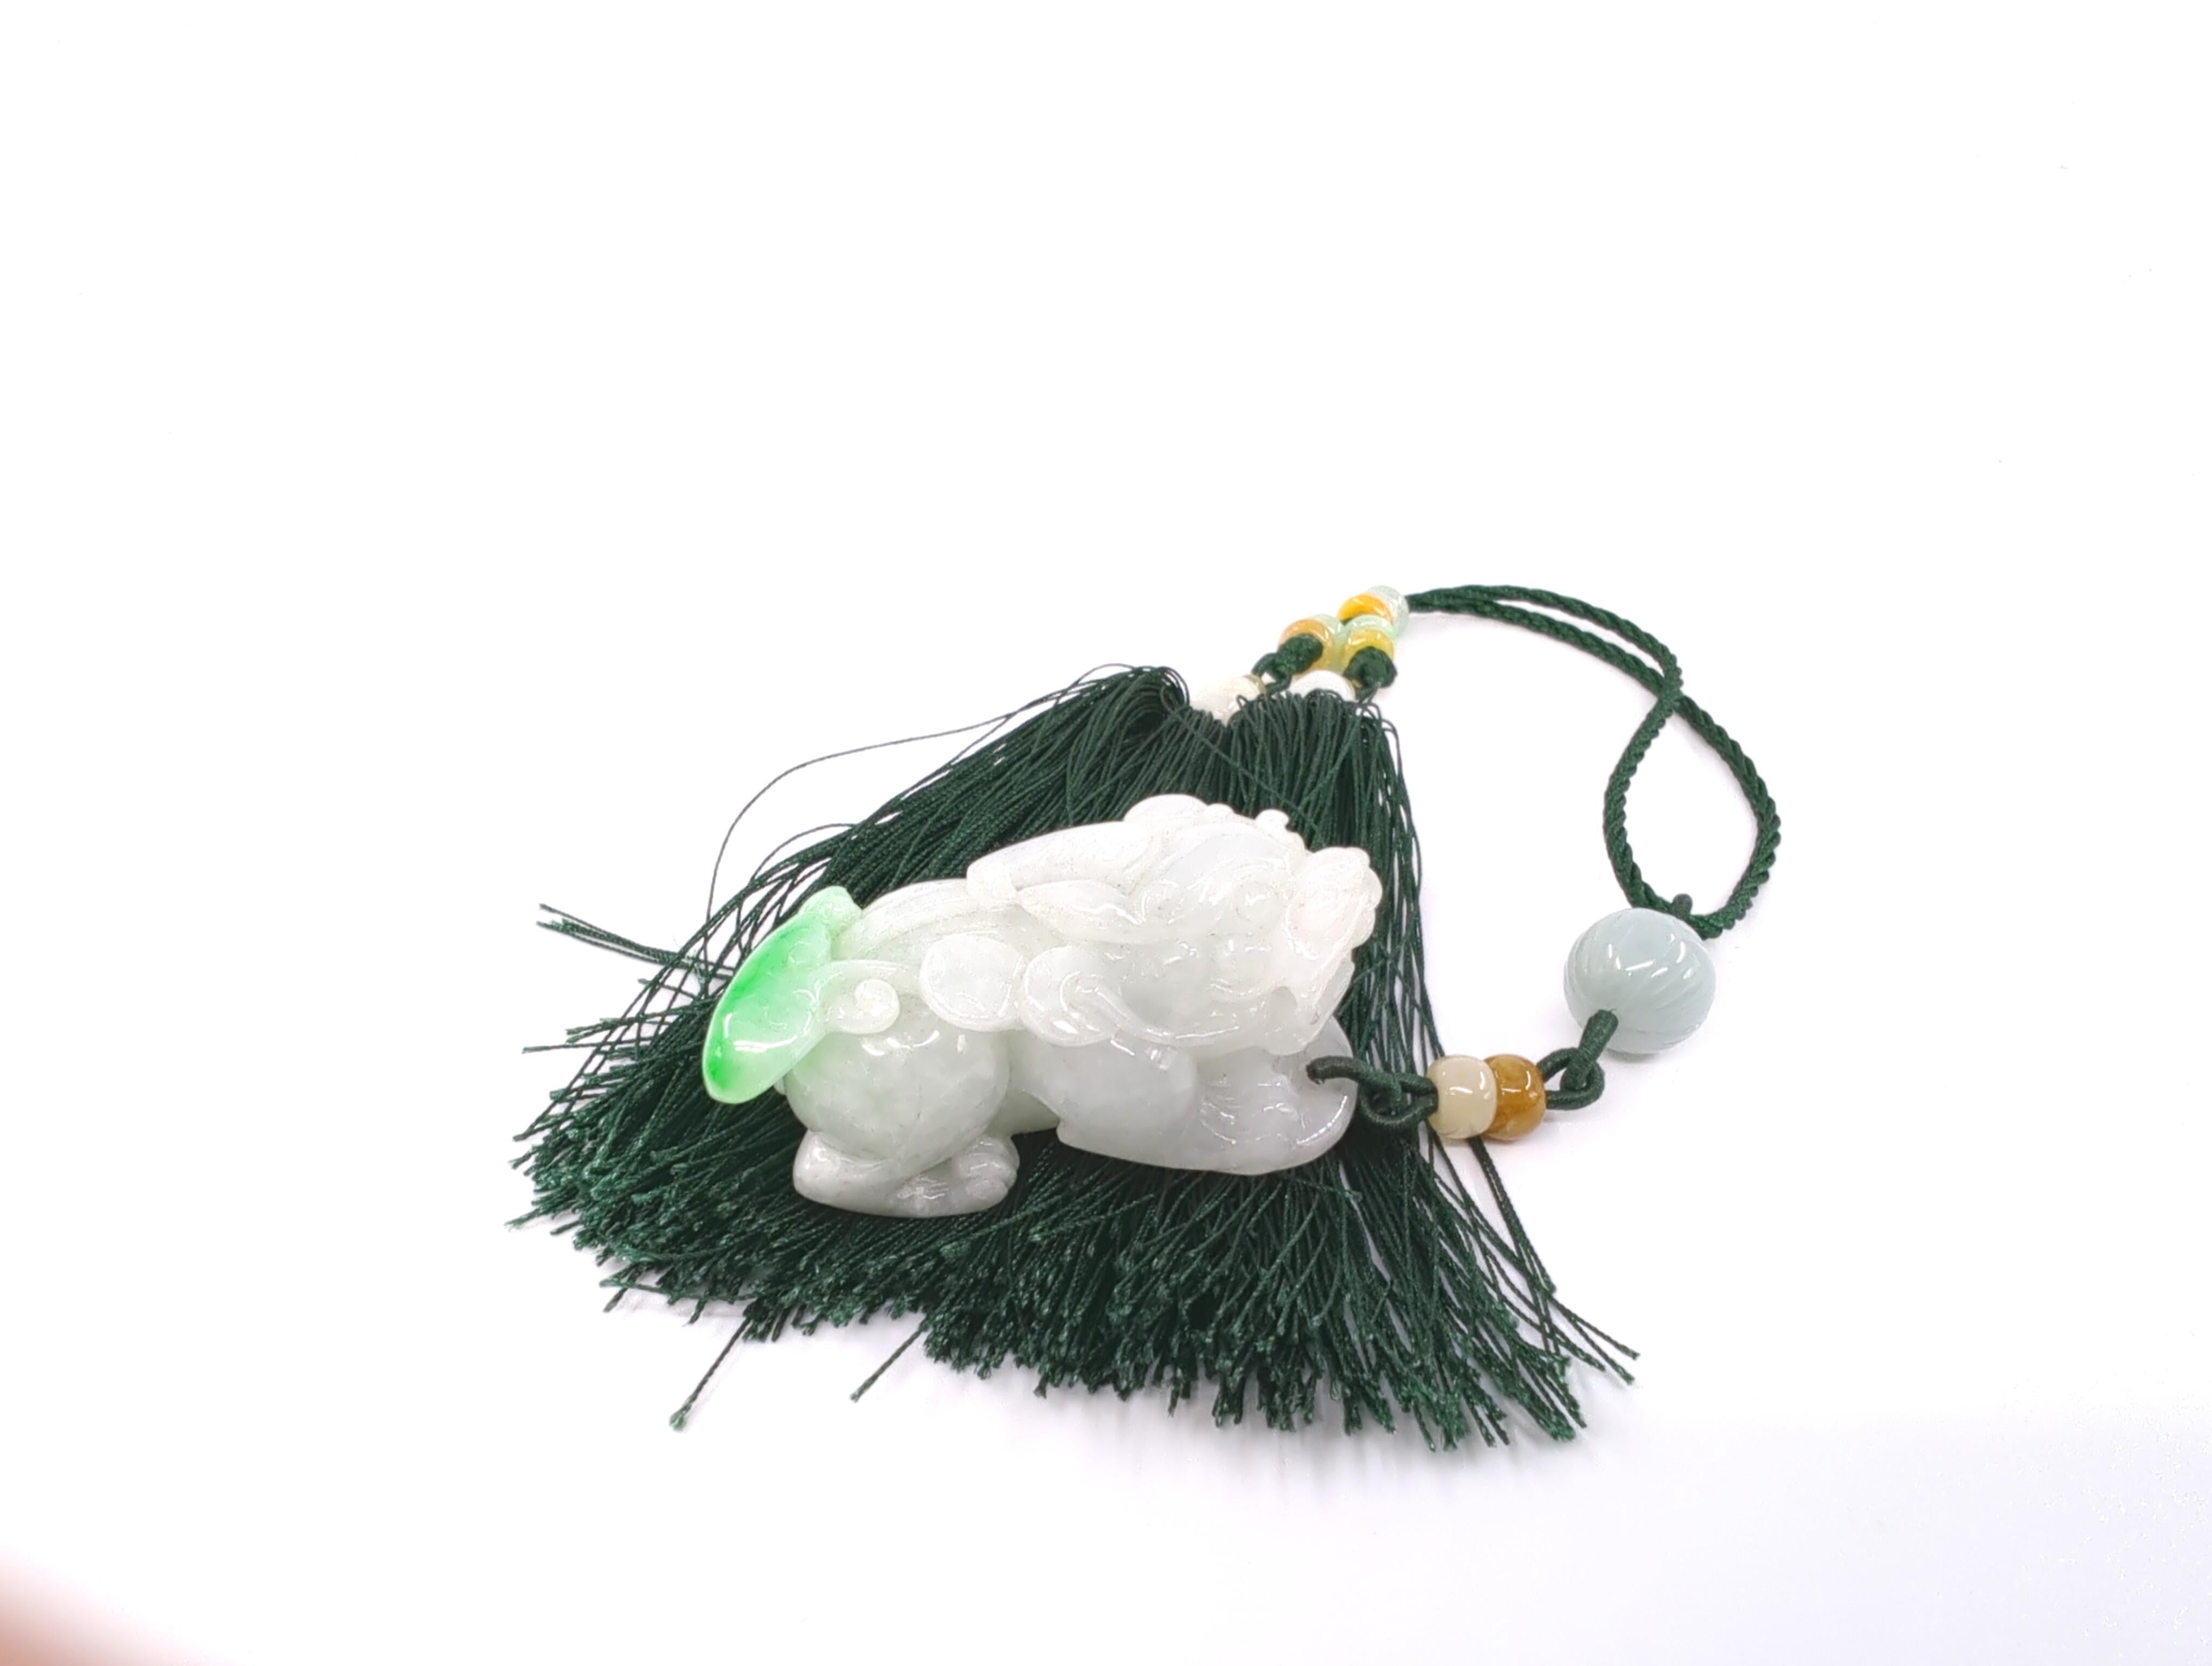 Exquisite Carved Chinese Jadeite Pixiu Pendant Toggle with Tassels - A Grade In Excellent Condition For Sale In Richmond, CA